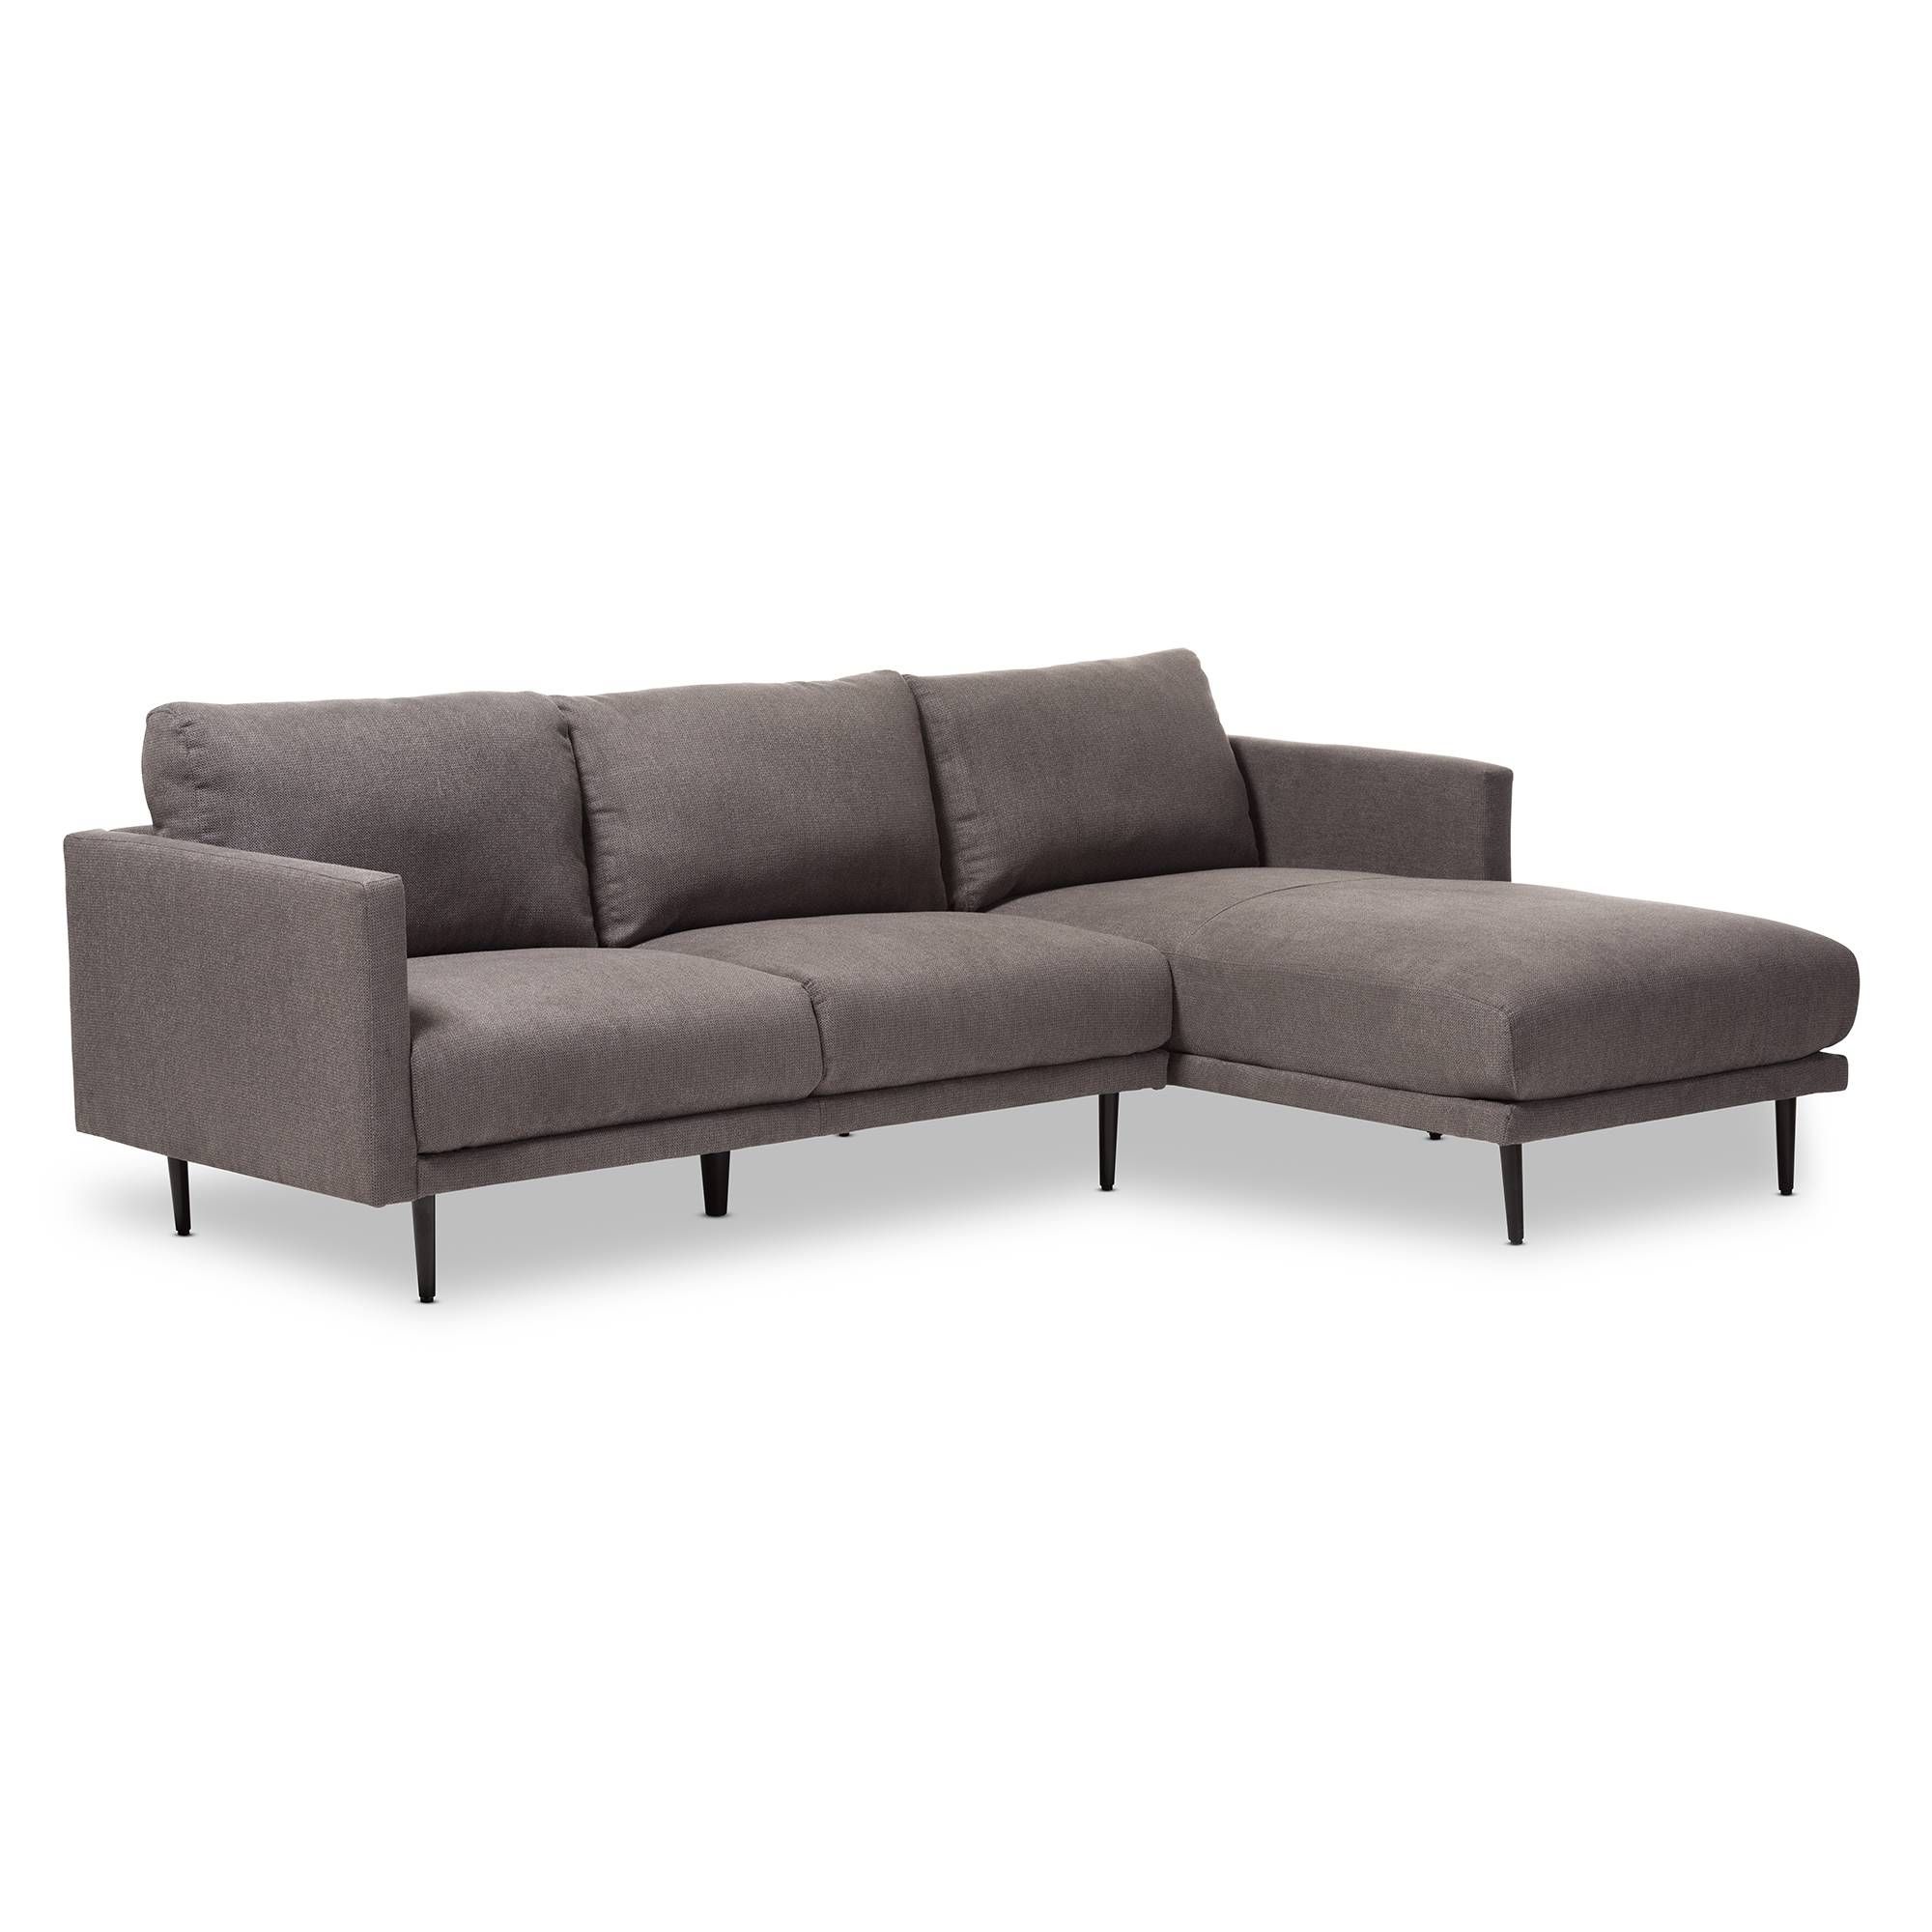 Furniture: Sears Canada Couches | Sears Couch | Sectional Sofa Regarding Sears Sofa (View 4 of 25)